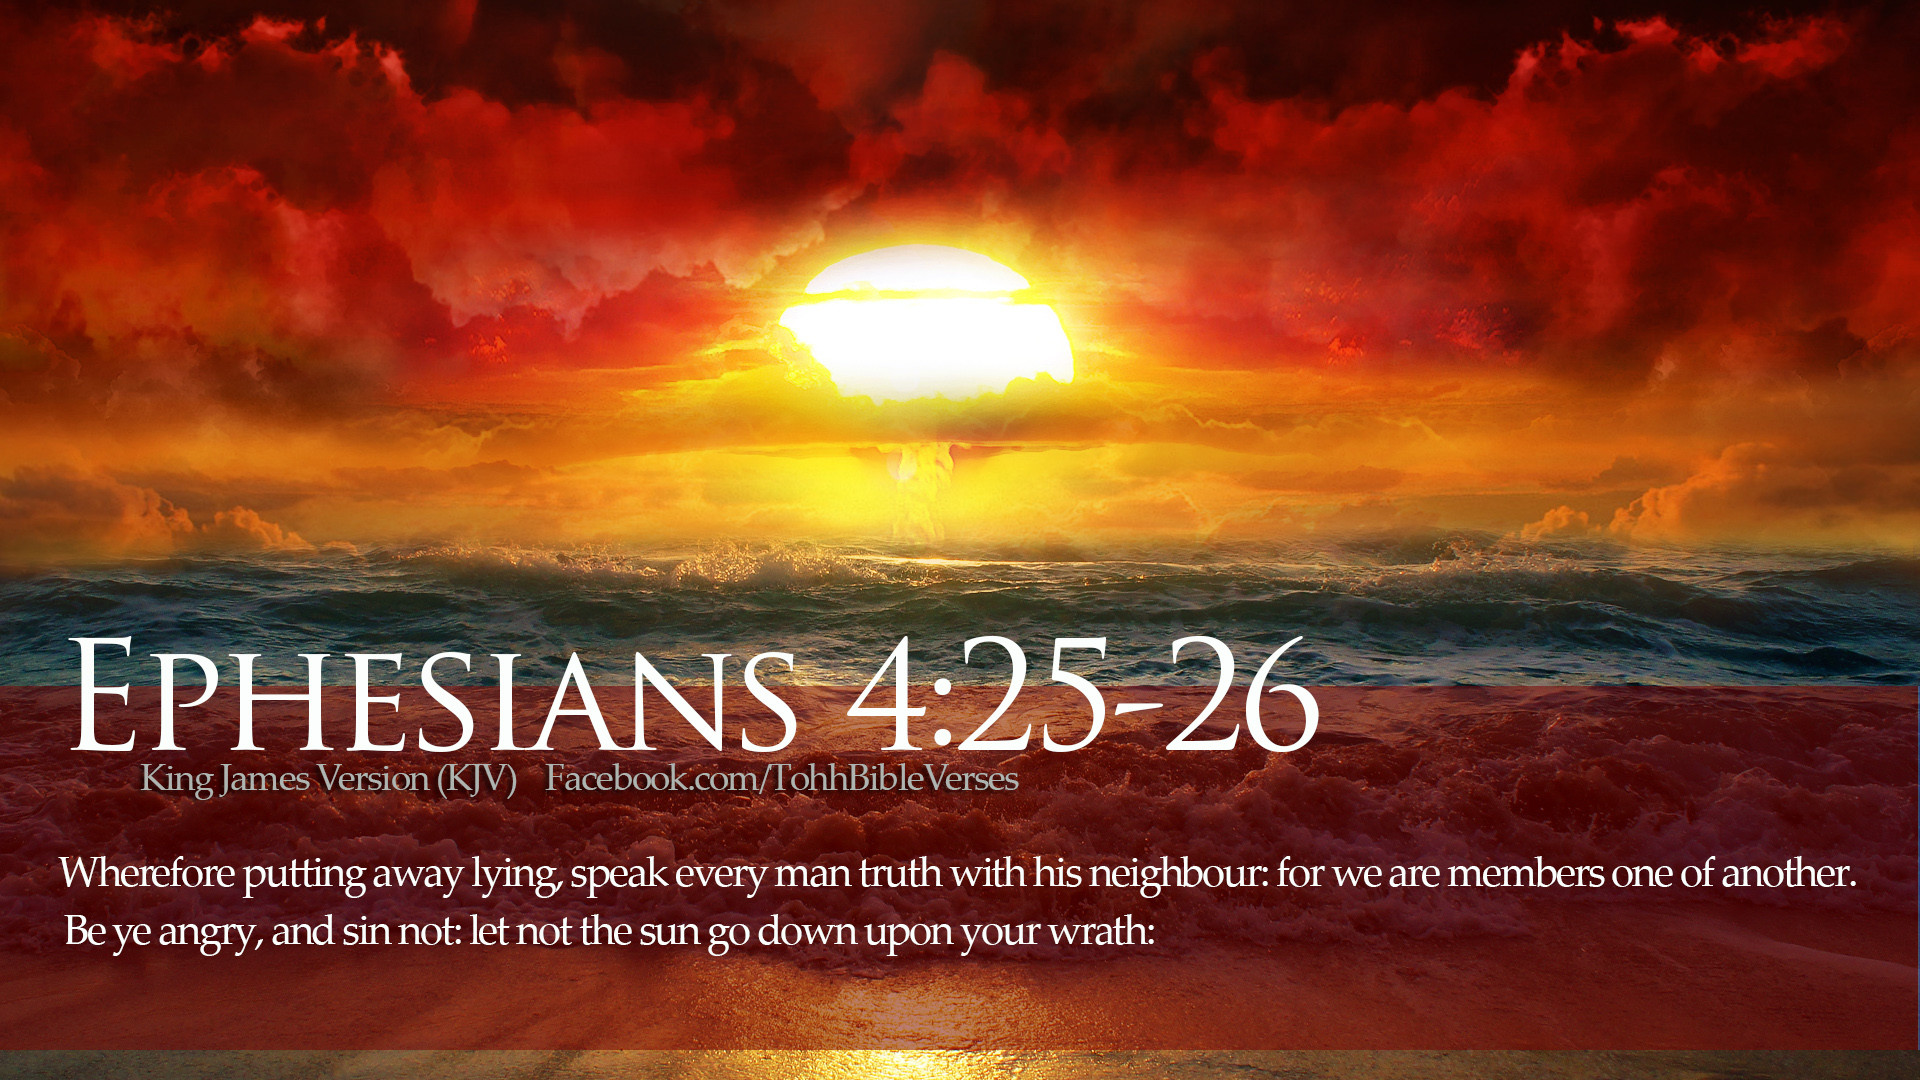 Christian Hd Wallpapers 1080p 71 Images